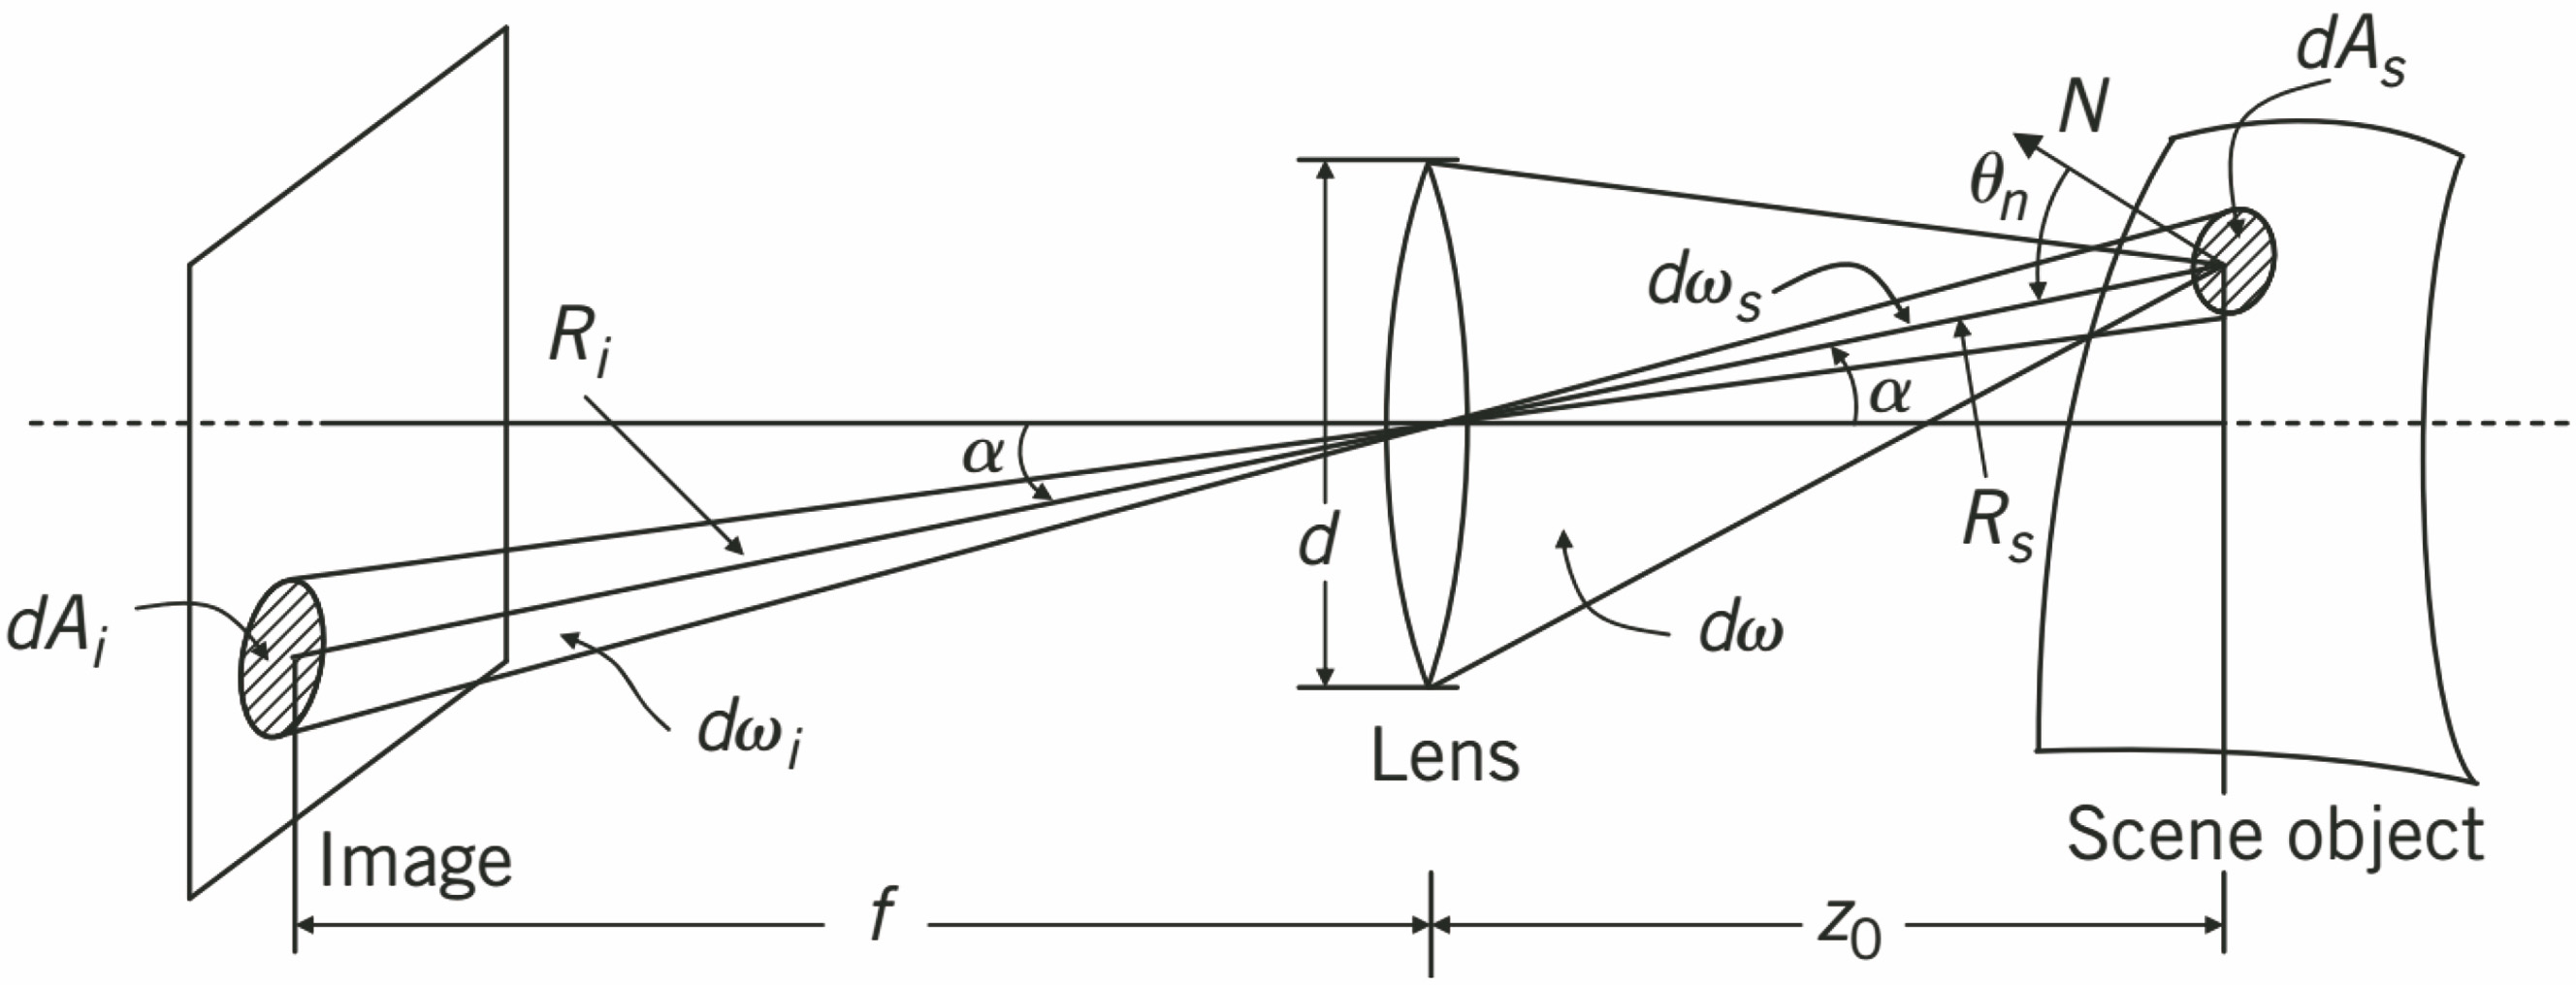 Imaging path of object in near-field photometric stereo vision scene[8]